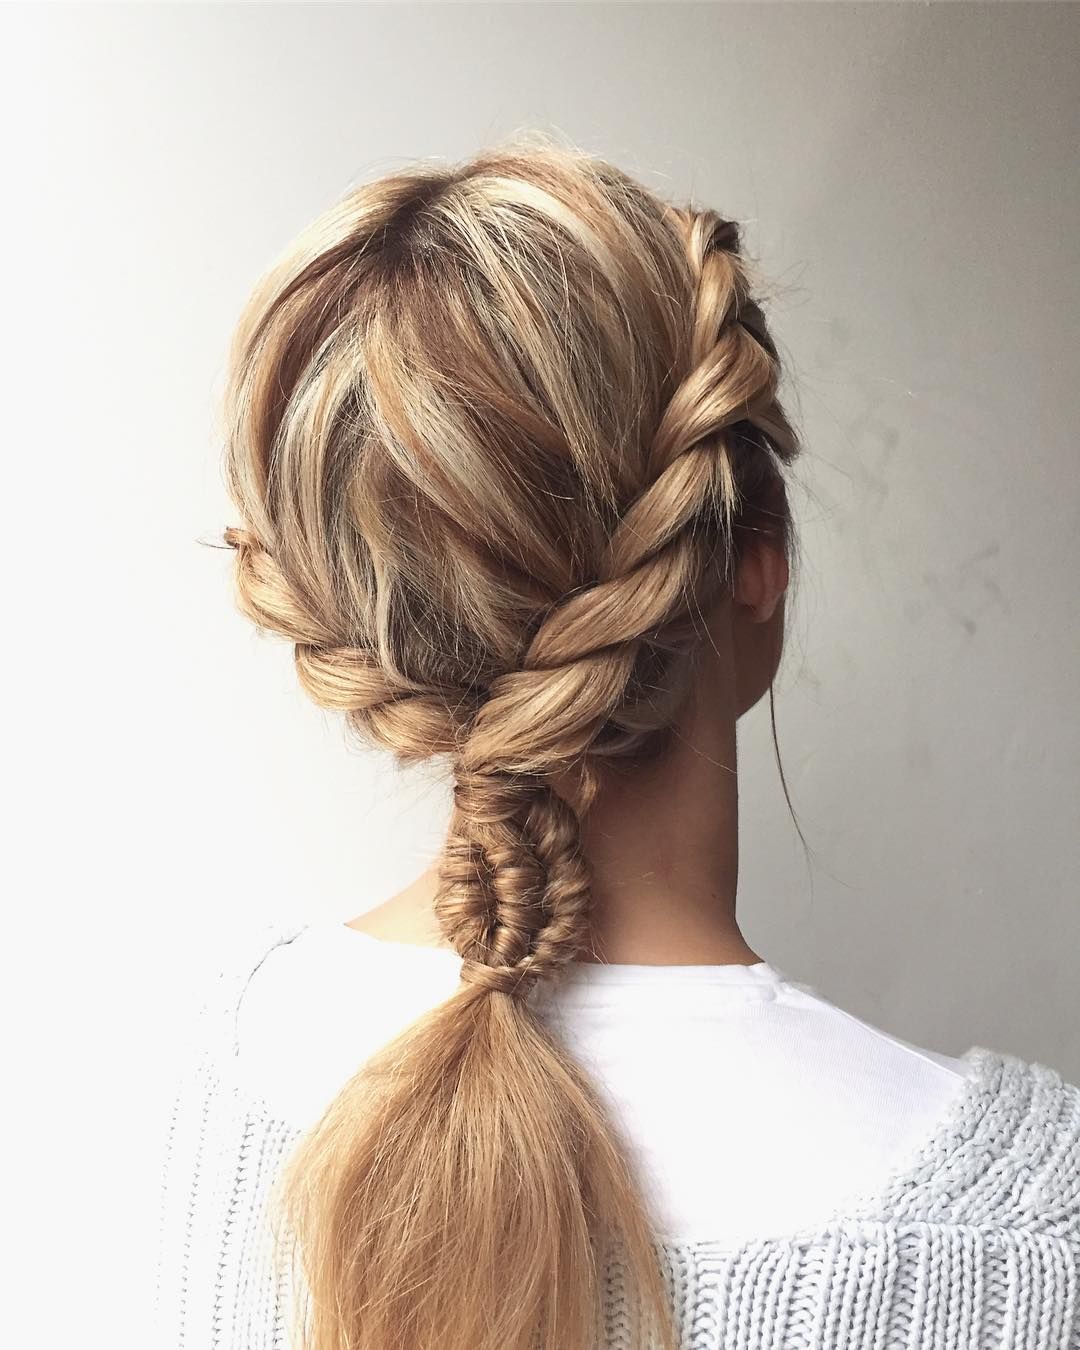 Twists & Braids, Featured hairstyle inspiration Gray Hair #hairstyle #braids #hair #weddingha. Braided hairstyles, Stylish hair, Cool braid hairstyles